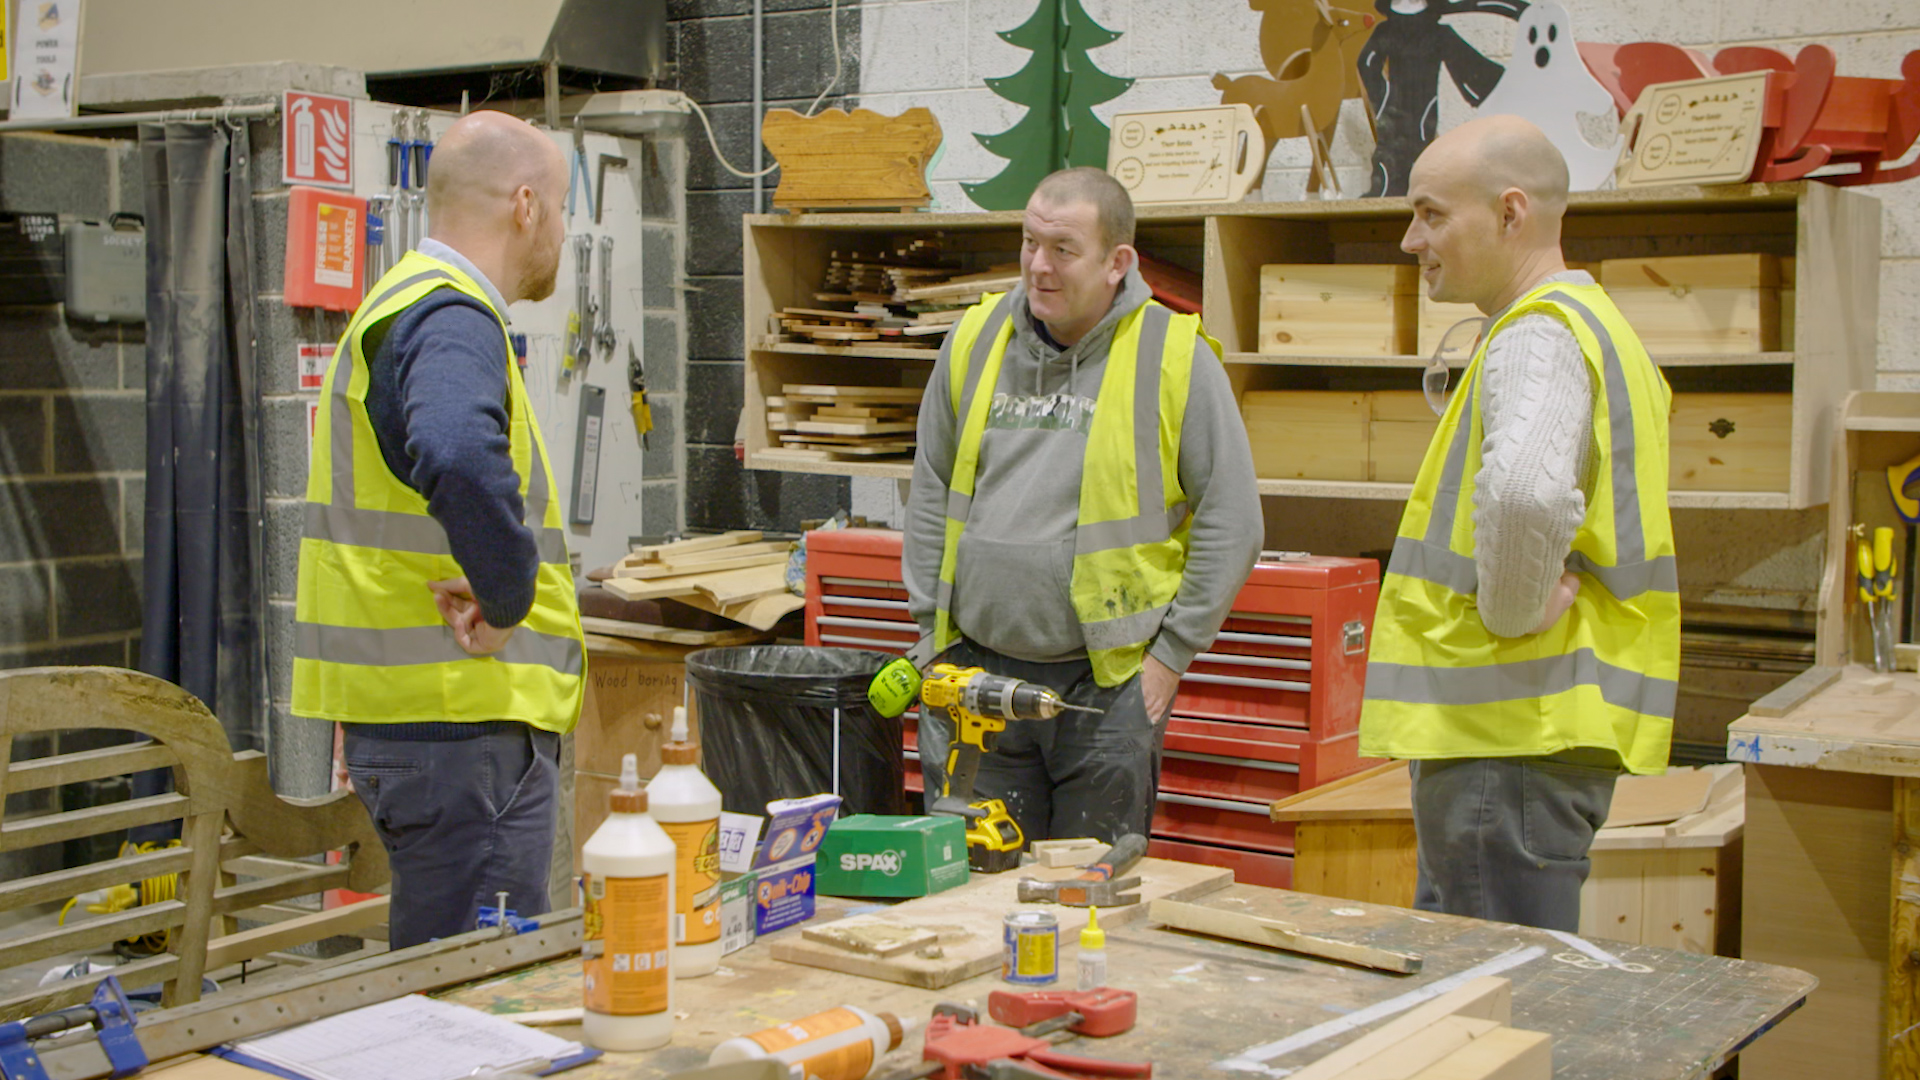 Cairde Enterprises Limerick is a social enterprise making and selling furniture and wood products while offering jobs to ex-offenders